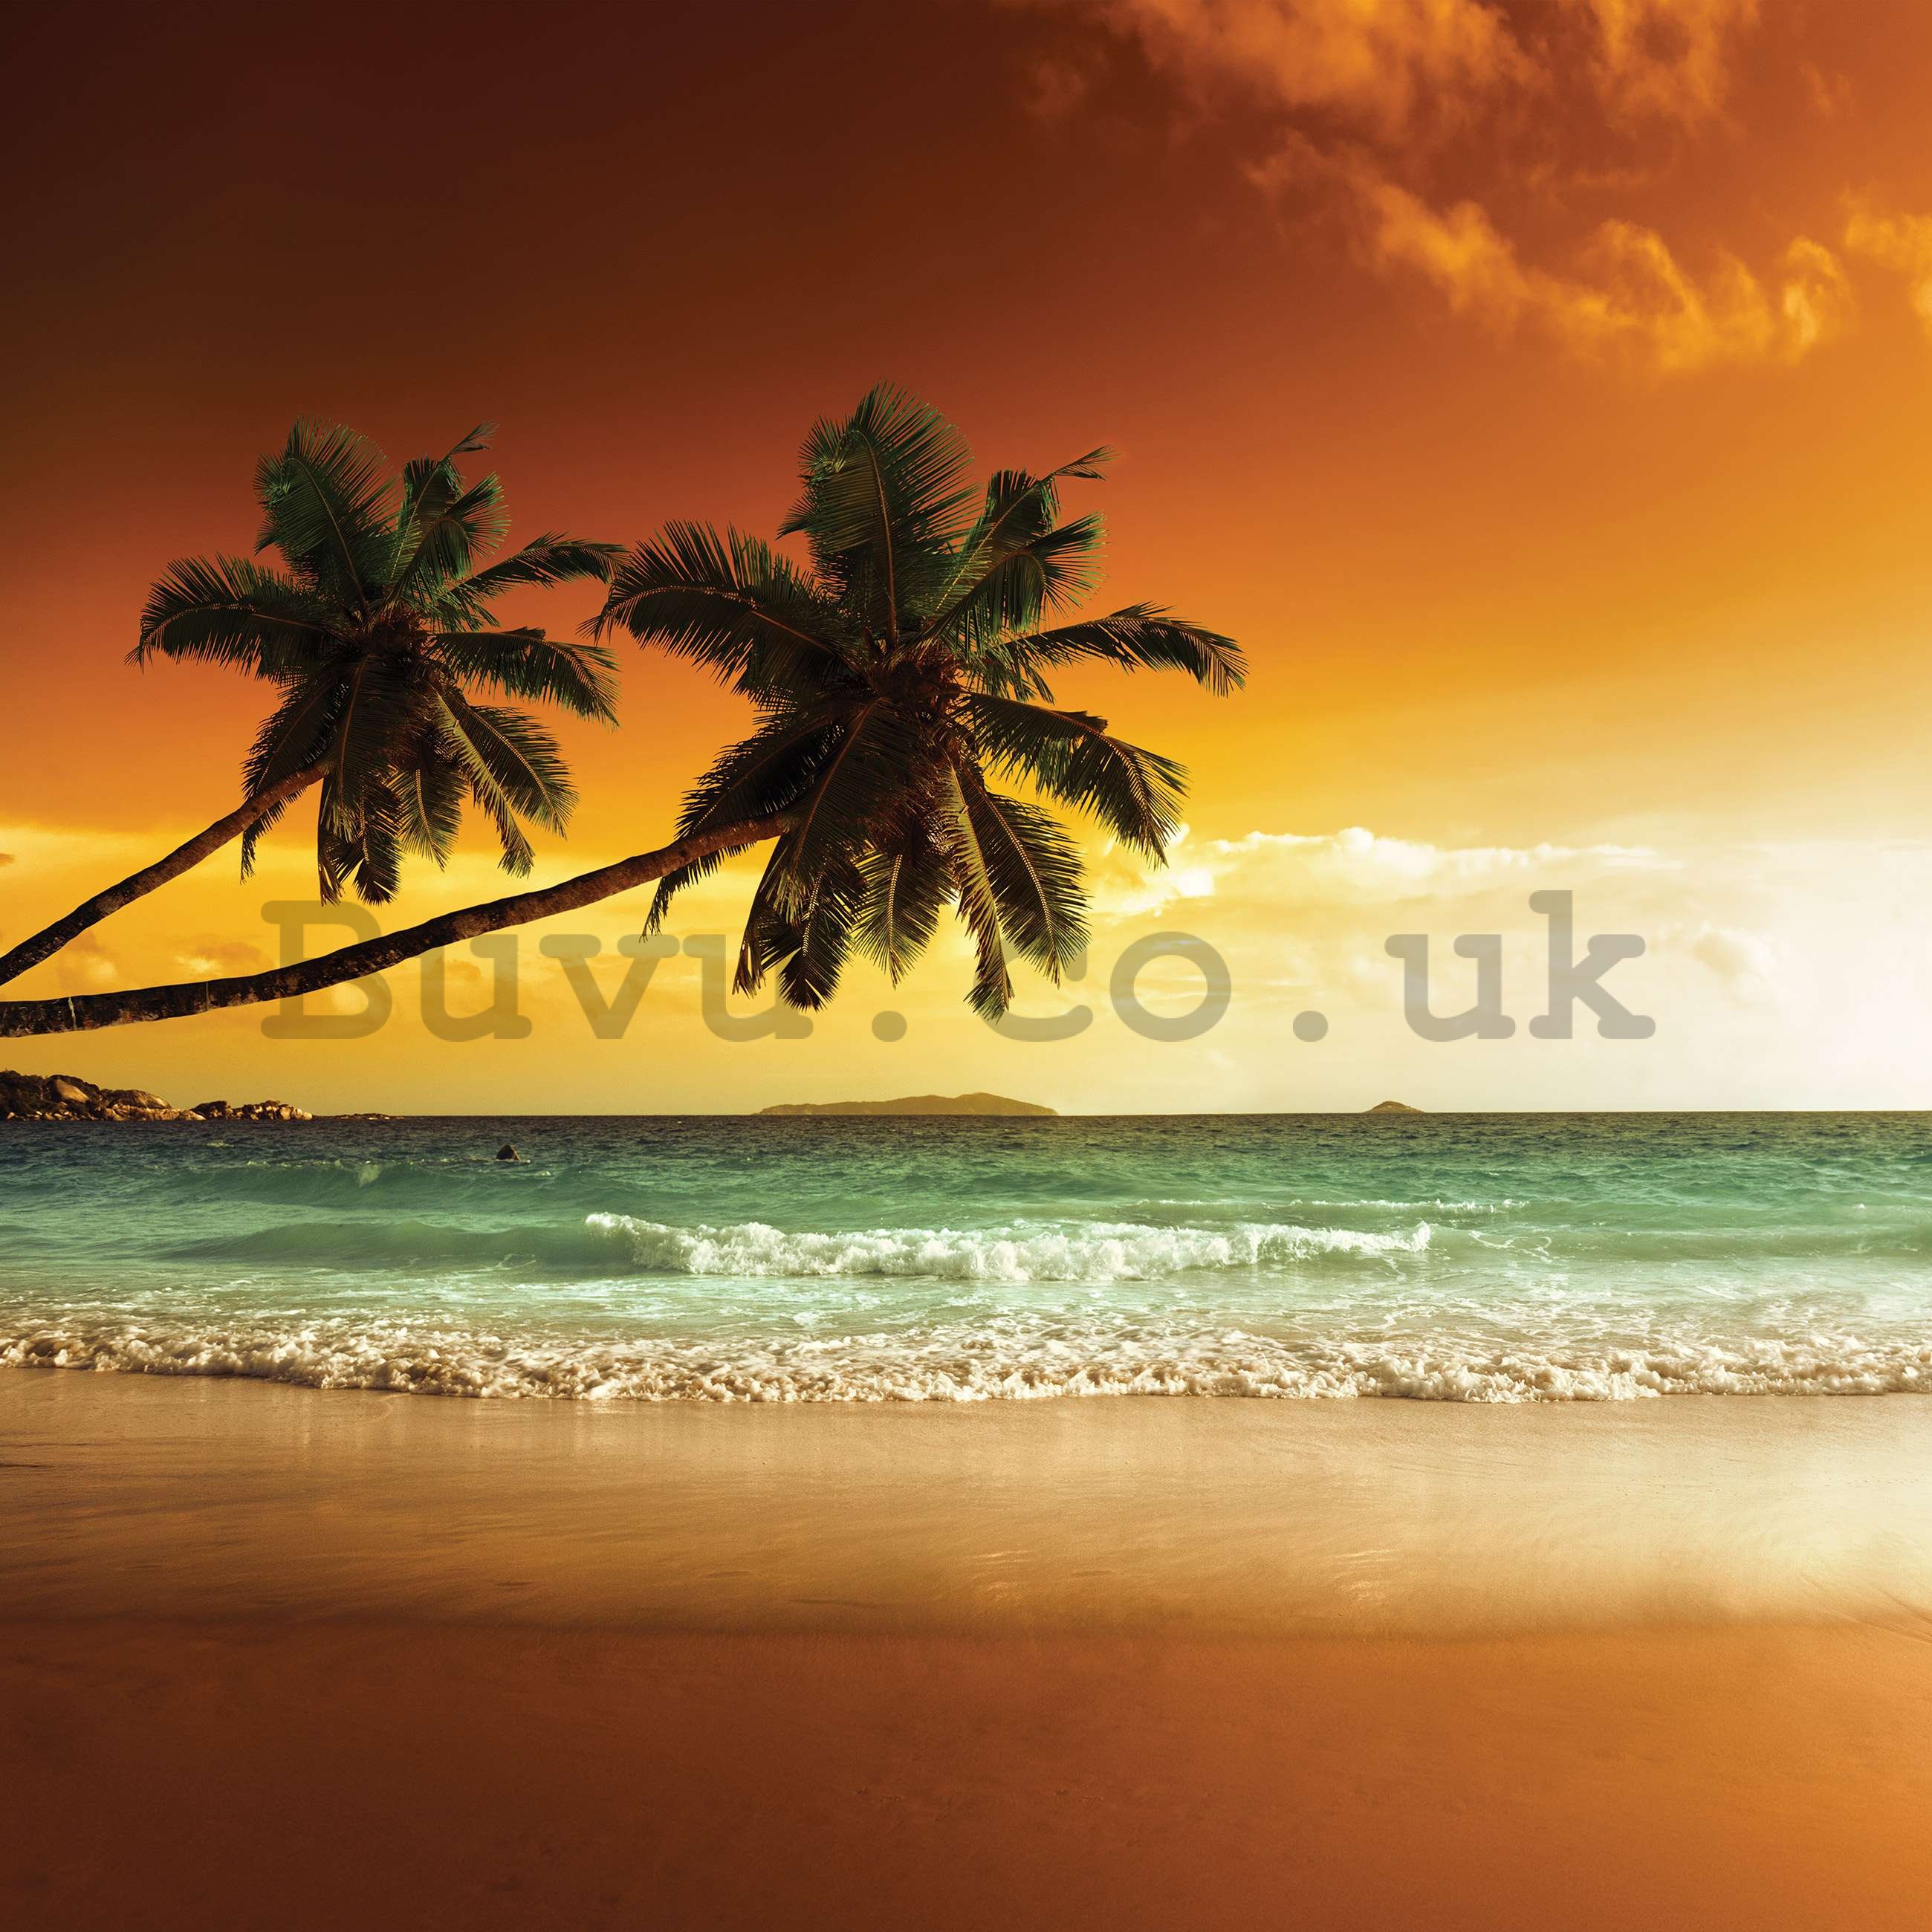 Wall mural vlies: Palm trees and beach at sunset - 368x254 cm